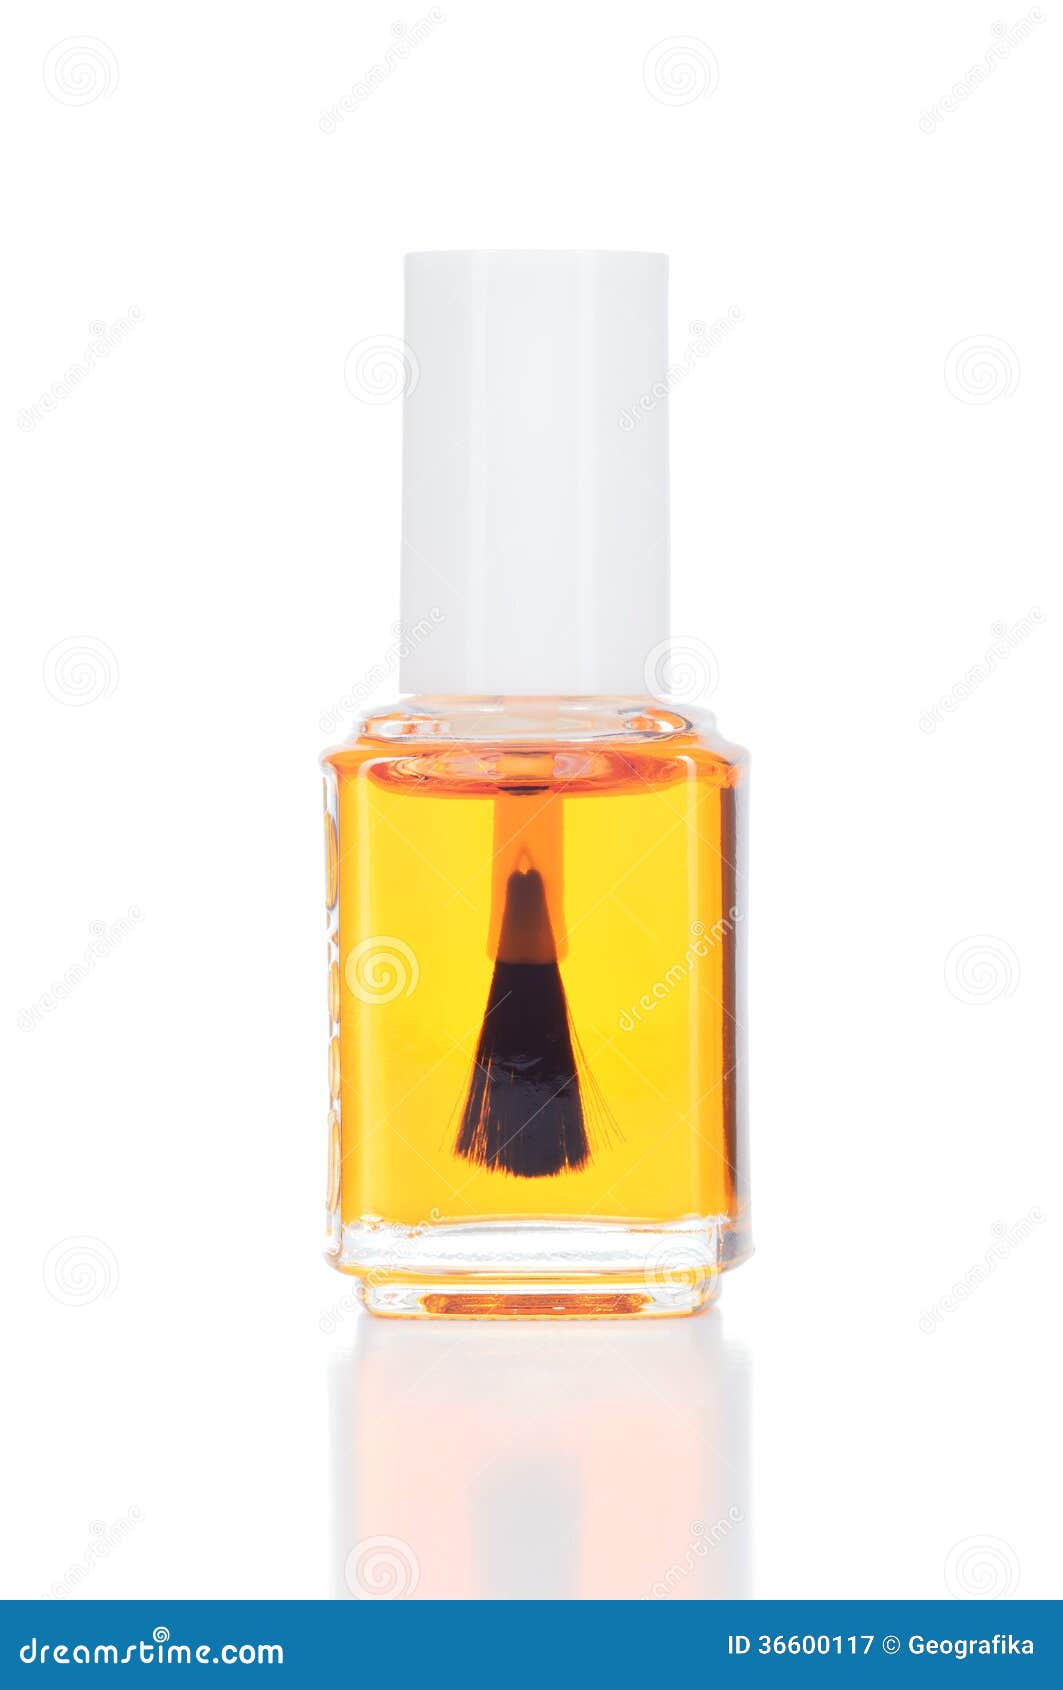 nail and cuticle oil on white background.